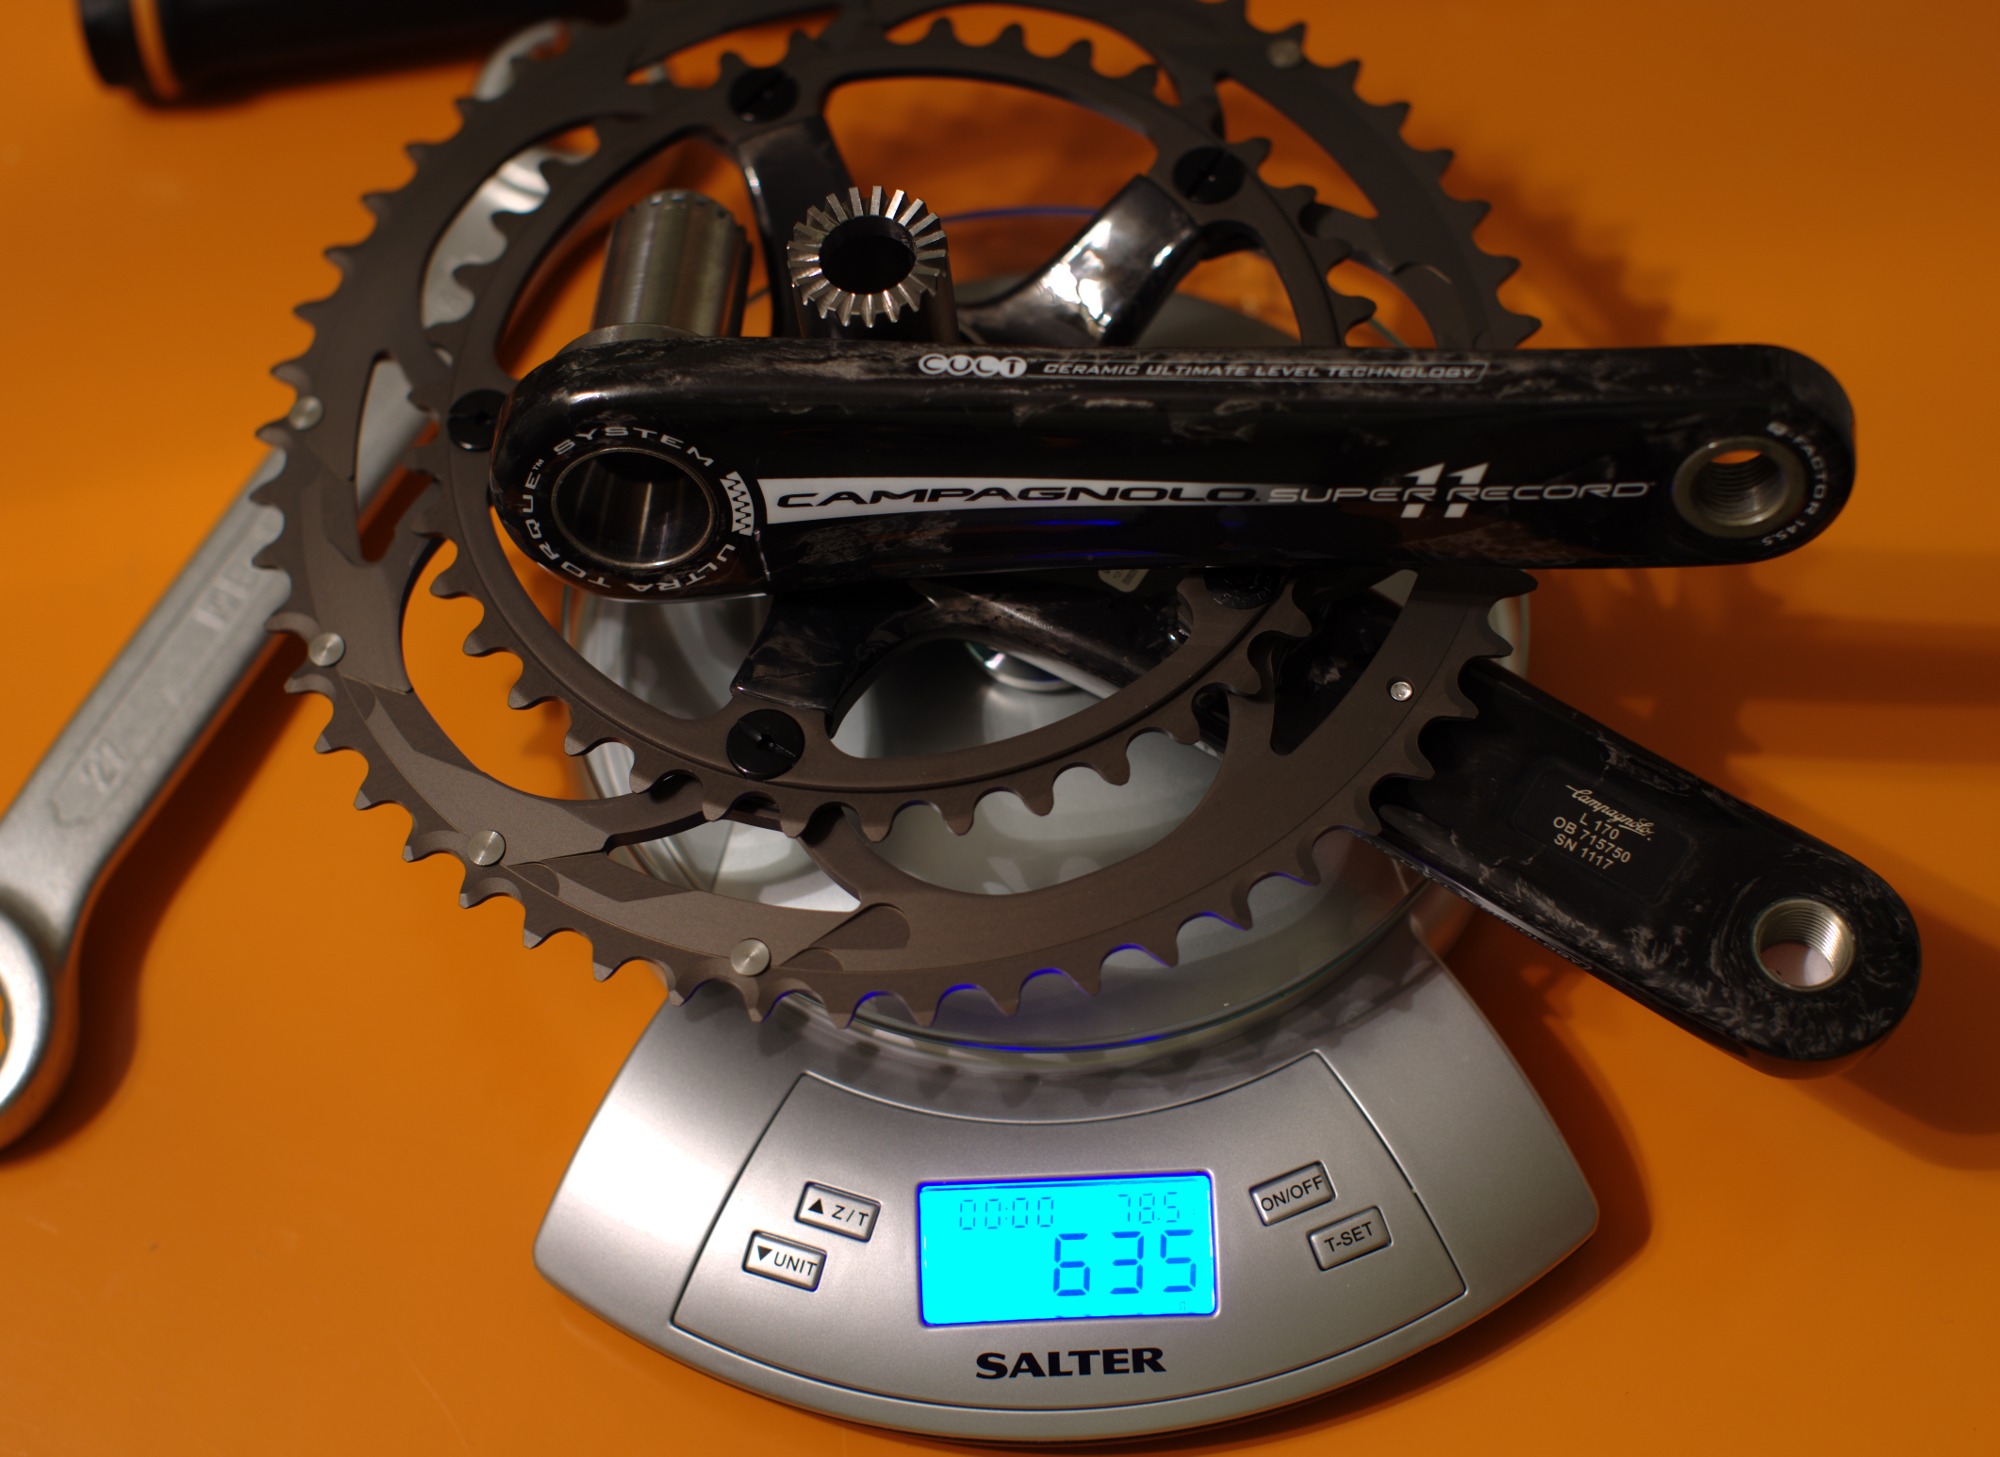 Campy ultra torque system weight